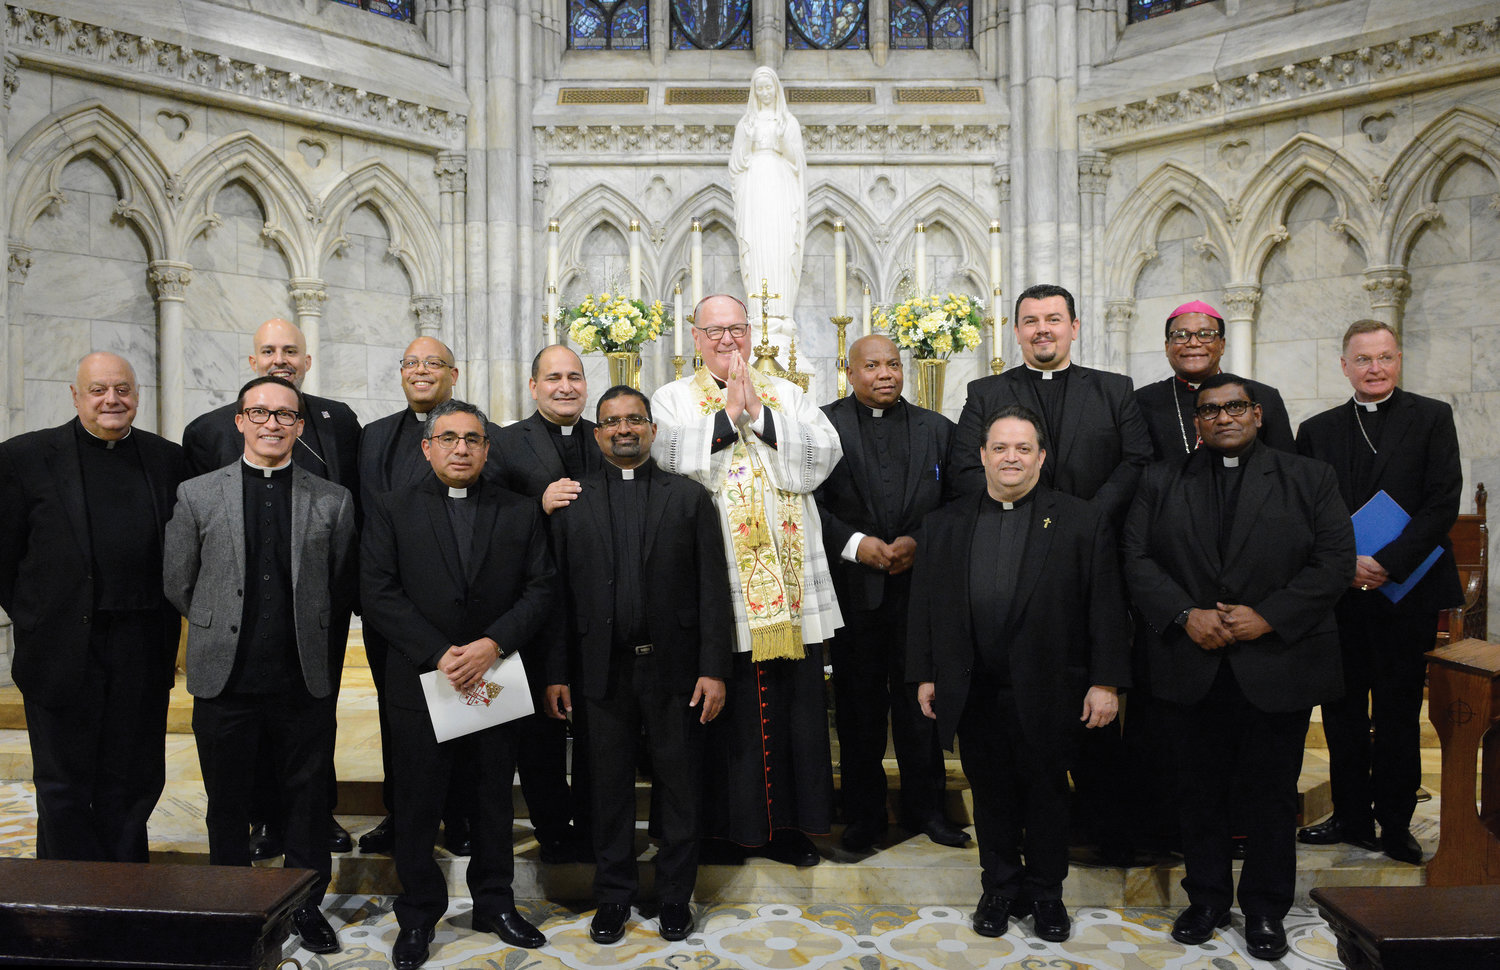 Nine newly incardinated priests of the Archdiocese of New York join Cardinal Dolan and other prelates Sept. 28 in the Lady Chapel of St. Patrick’s Cathedral. Above right are, front row, from left: Msgr. Joseph LaMorte, vicar general; Father Angel Jimenez; Father Bladi Jesus Socualaya-Miranda; Father John Edison Lourdhusamy; Father Randall Soto and Father Conganige Anthony. Back row, from left: Auxiliary Bishop Joseph Espaillat; Father Jorge Cleto; Father Nelson Pichardo; Cardinal Dolan; Father Cyprien Emile; Father Ivan Lovric; Bishop Pierre-André Dumas of Anse-á-Veau and Miragoane, Haiti; and Auxiliary Bishop Edmund Whalen.